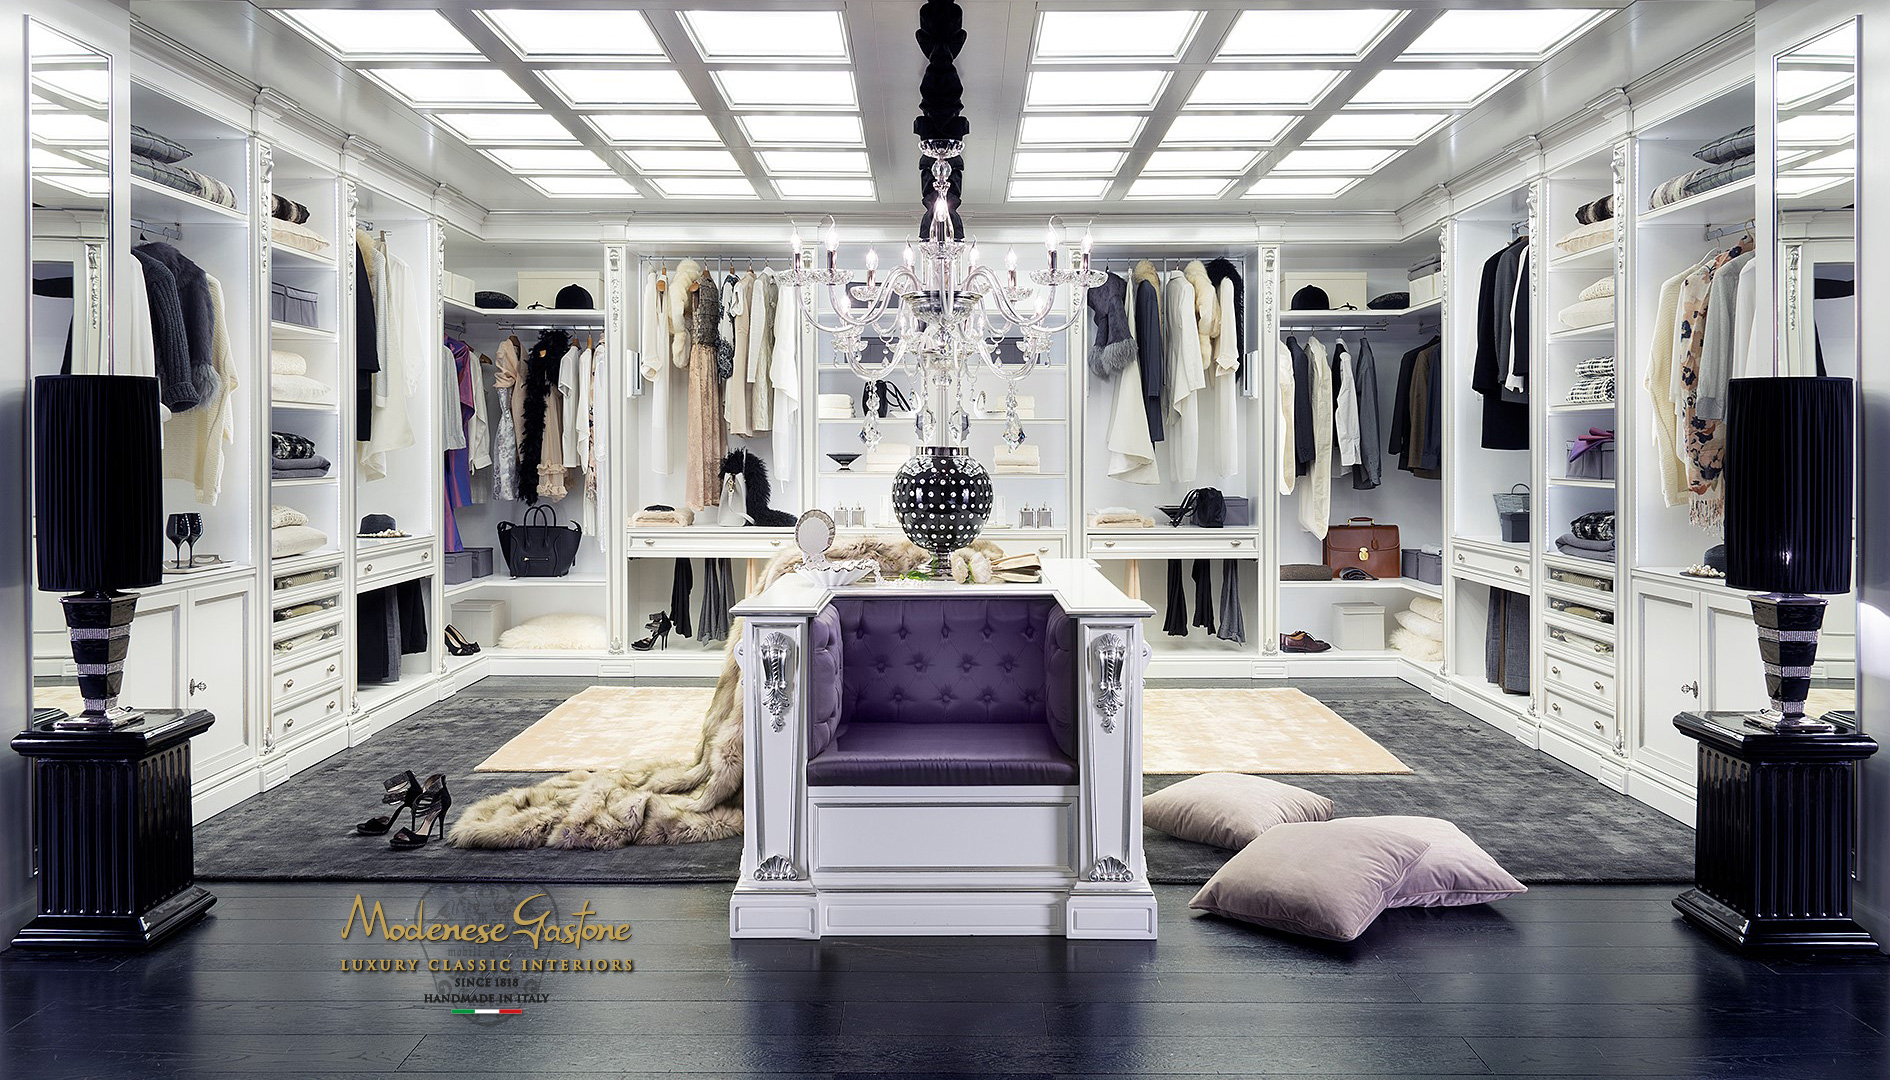 High End Walk-in Closet Design For large Room - Classical Interior